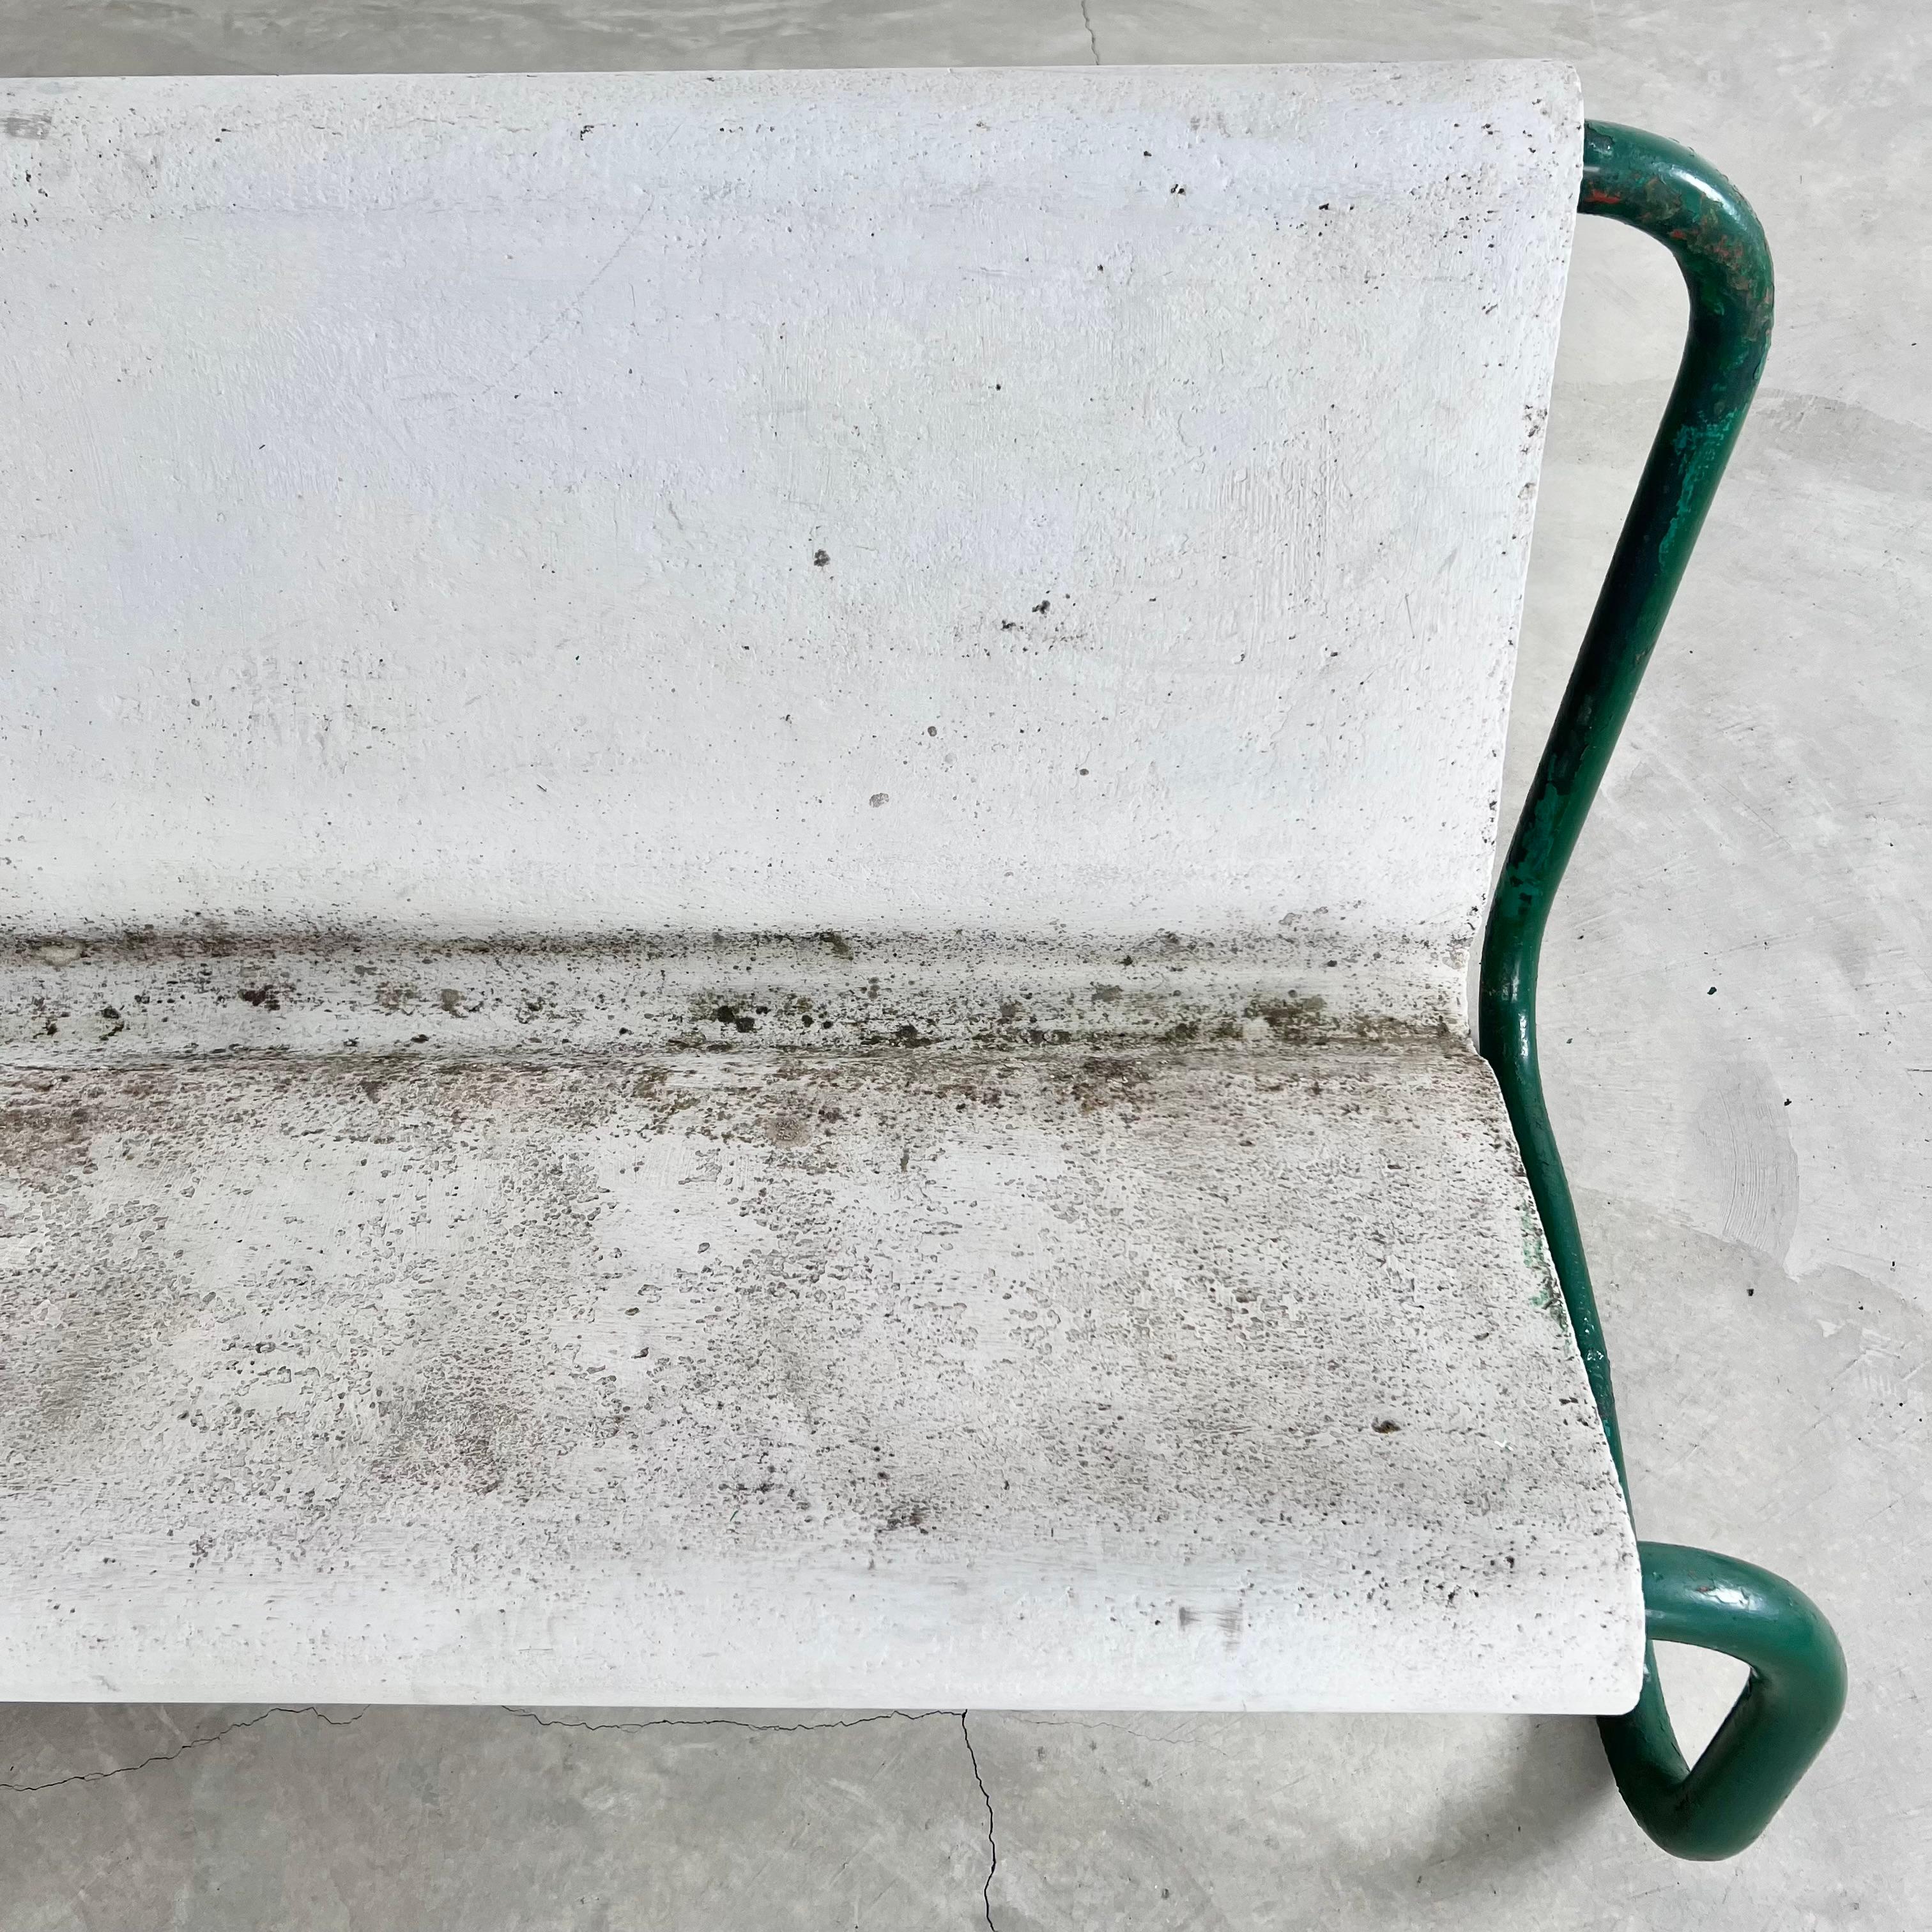 Hand-Crafted Willy Guhl Concrete and Steel Floating Bench, 1960s Switzerland For Sale